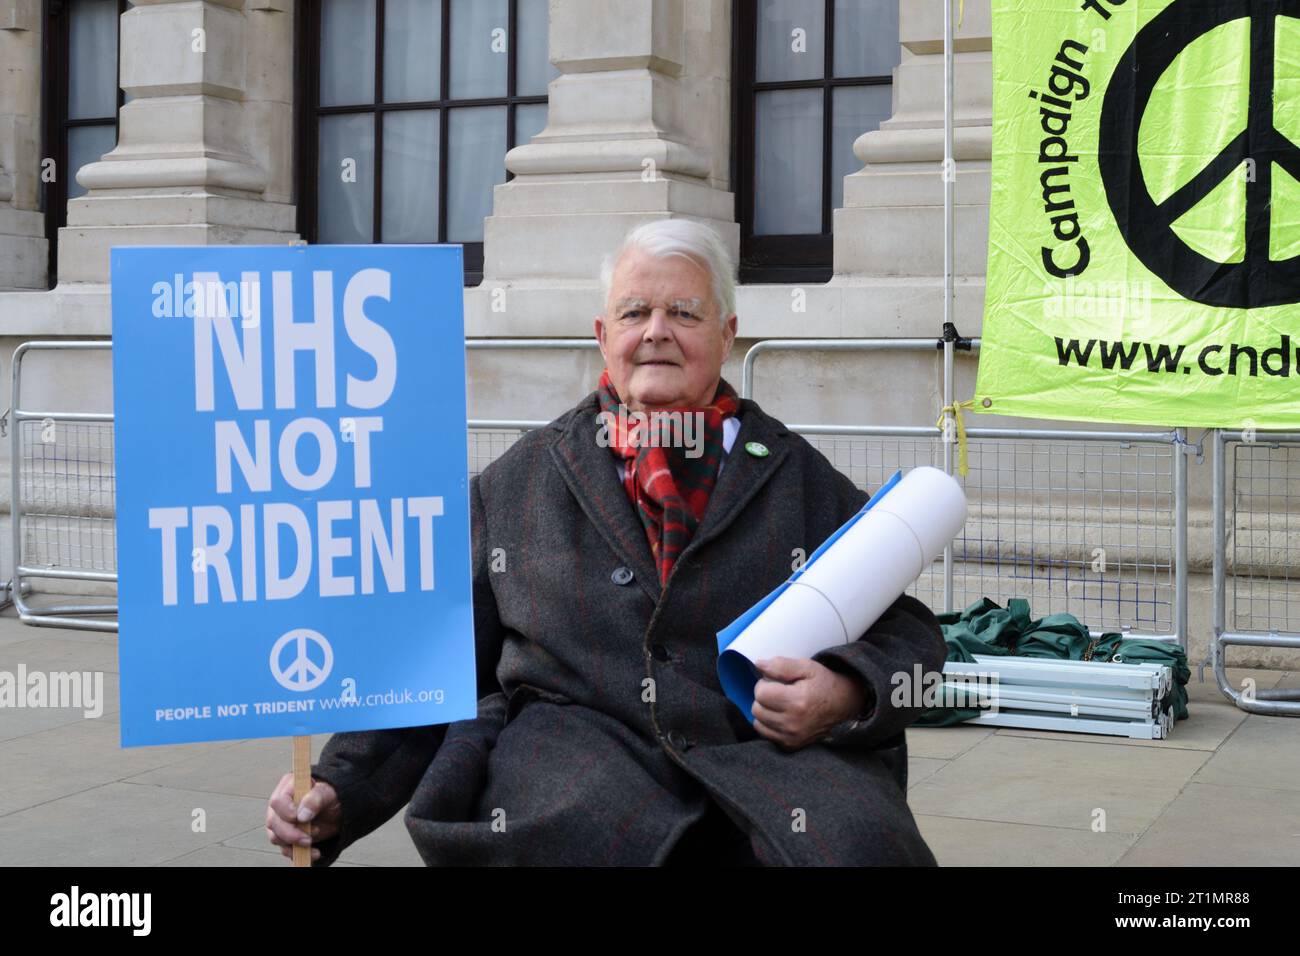 Horse Guards Avenue, London, UK - April 13th 2015: Bruce Kent activist and honorary vice president of CND sitting holding an anti Trident placard. Stock Photo